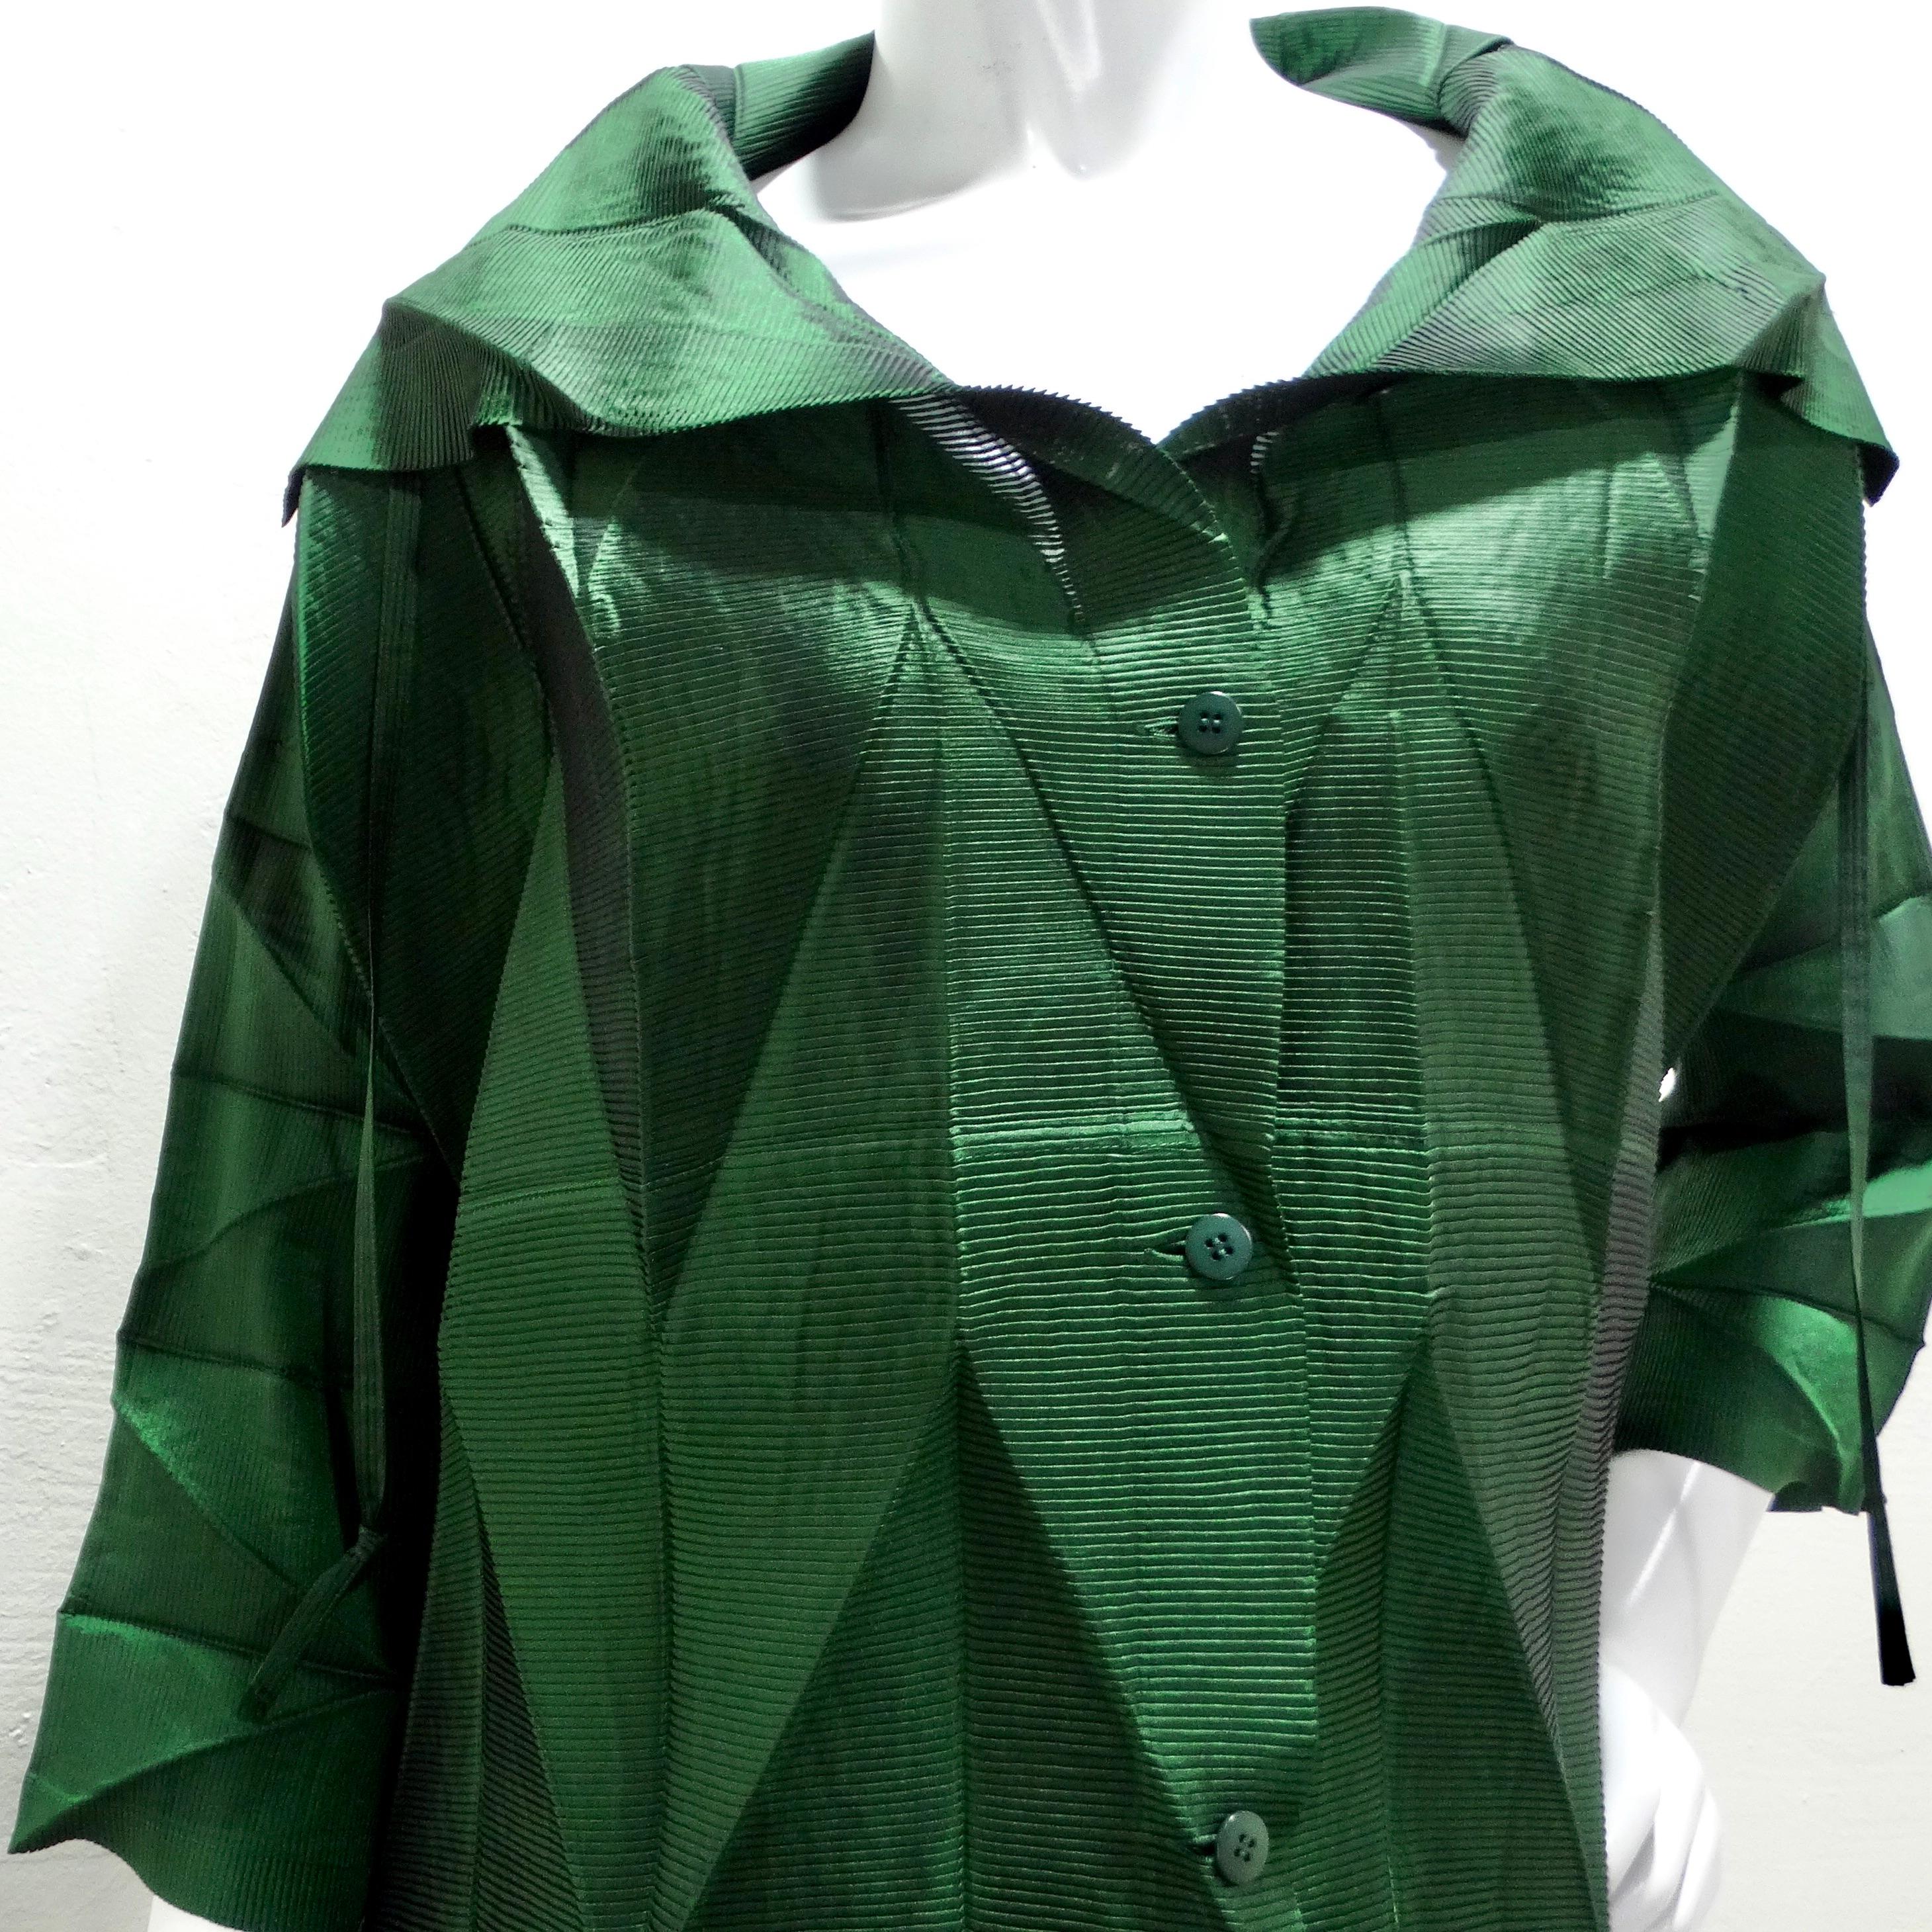 Issey Miyake Spring 2008 Runway Green Pleated Dress In Good Condition For Sale In Scottsdale, AZ